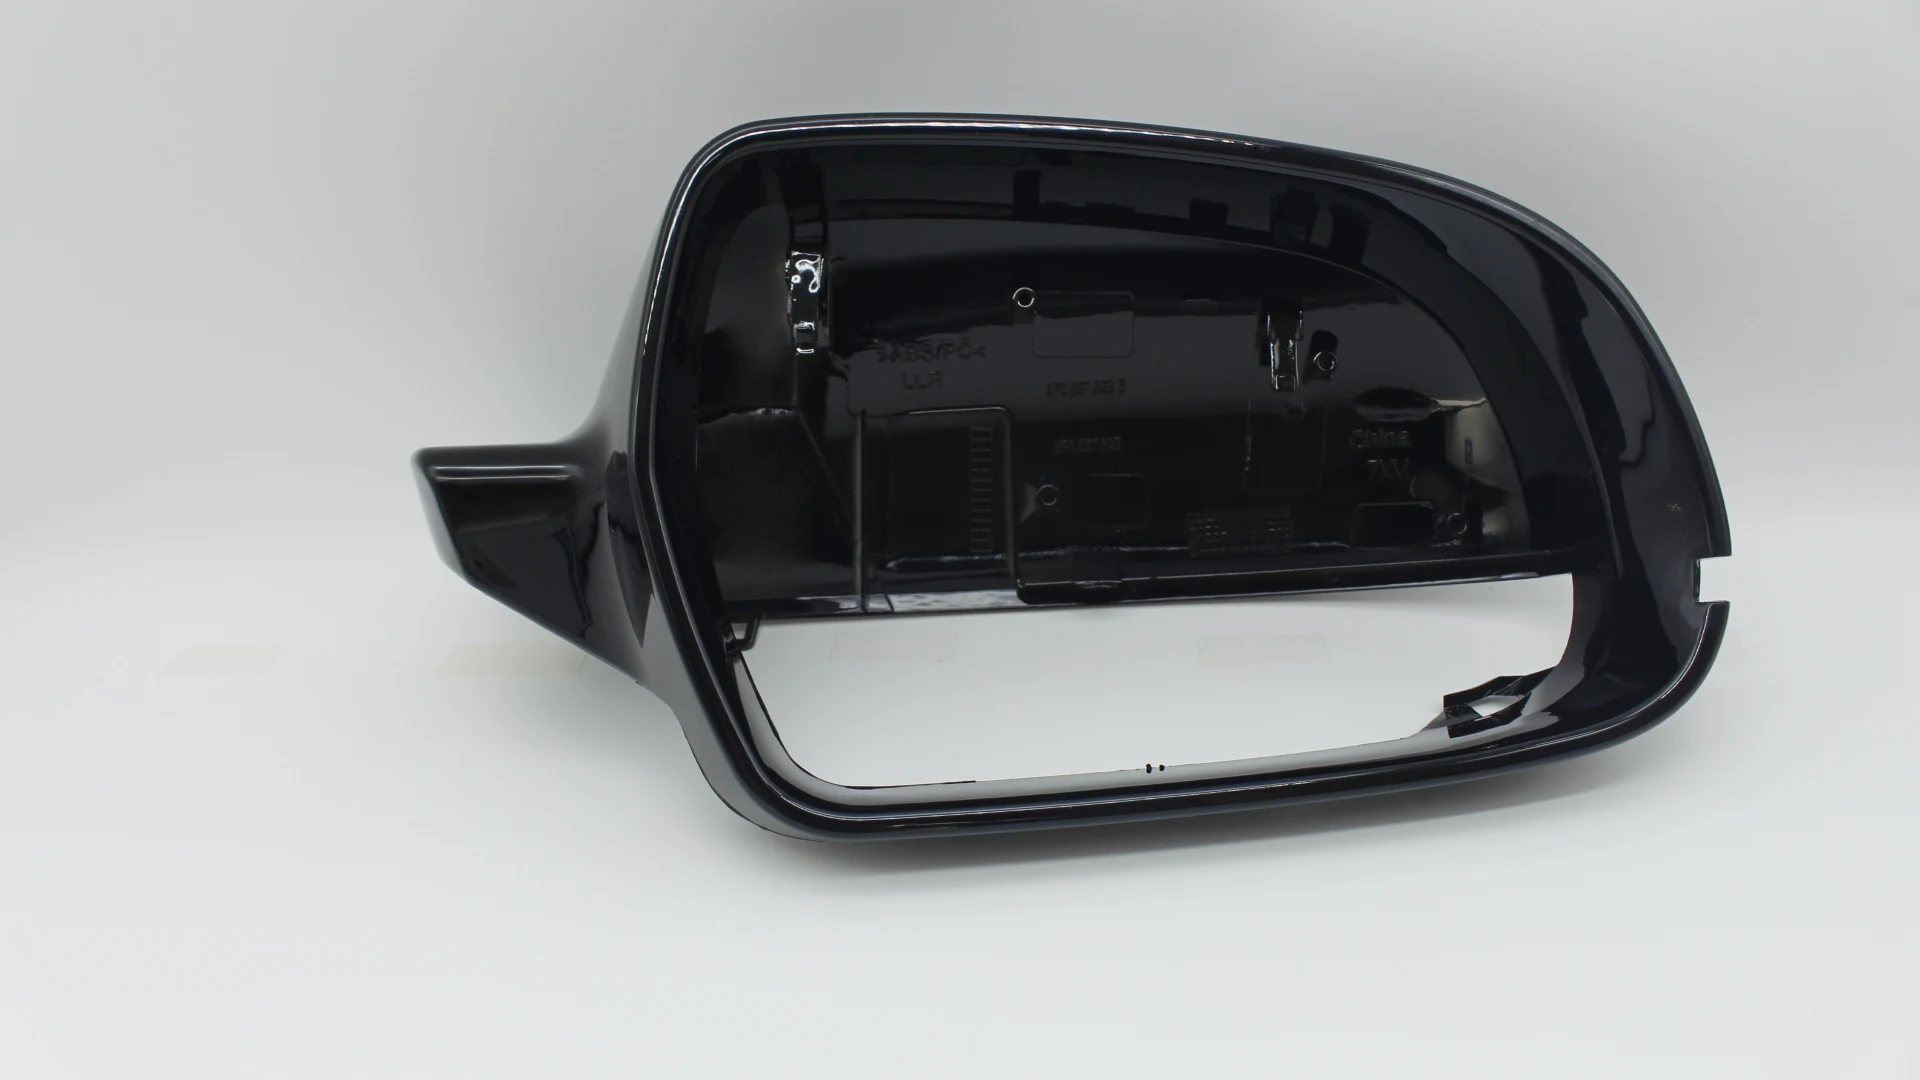 

Right SIDE black / CAR WING DOOR MIRROR COVER FOR Audi A4 S4 RS4 B8.5 2011-16, A5 S5 RS5 B8.5 10-16, A3 8P RS3